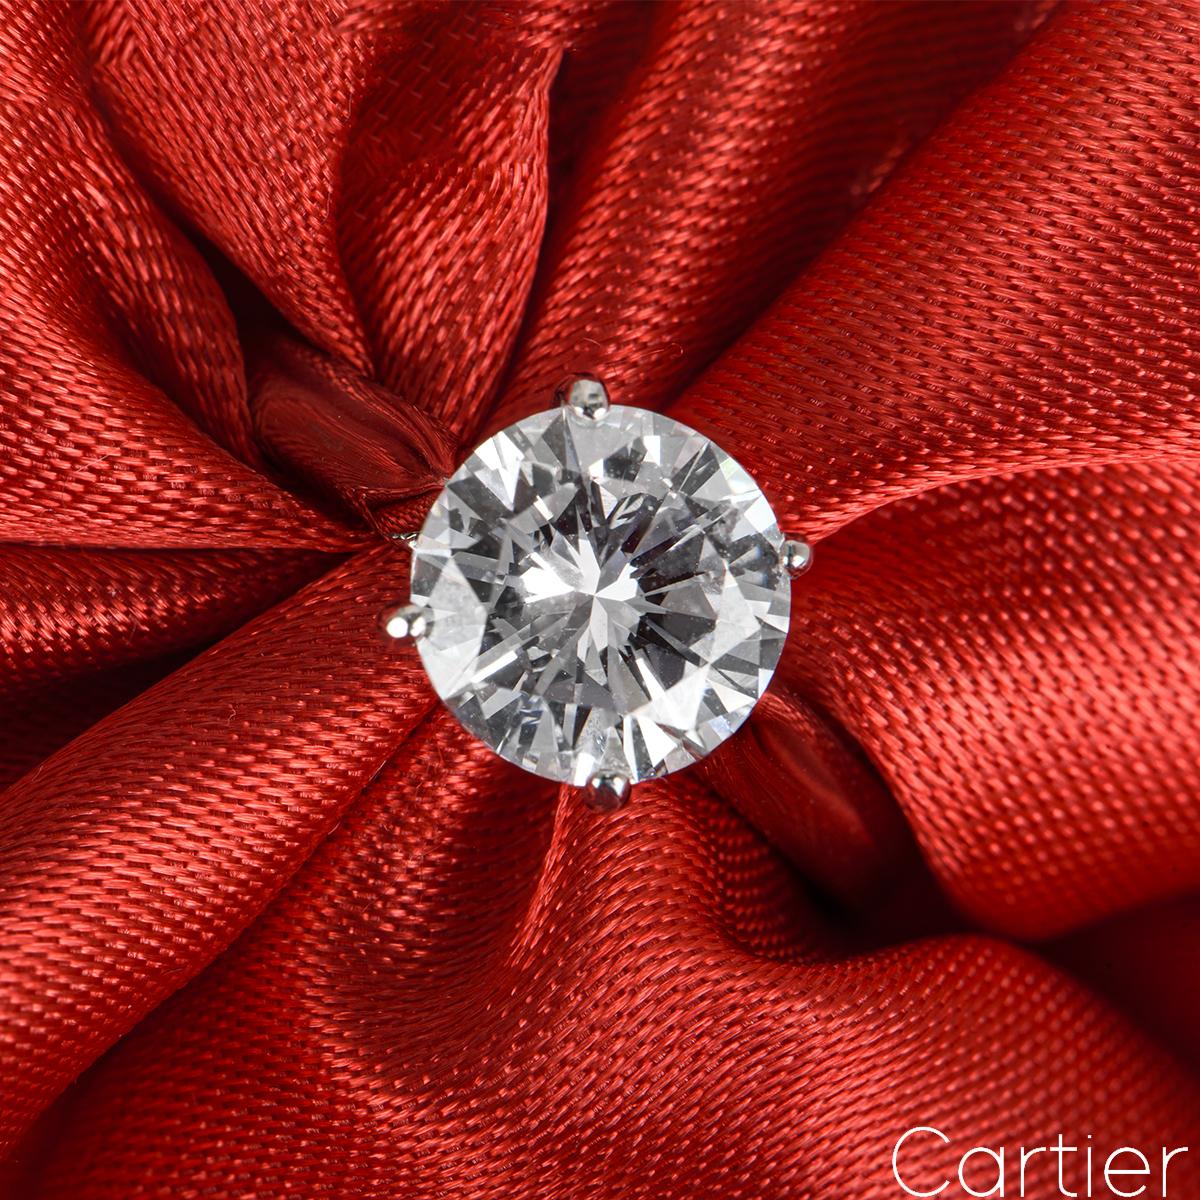 A stunning platinum diamond engagement ring by Cartier. The solitaire ring features a round brilliant cut diamond set in a classic 4 prong mount weighing 1.51ct, D colour and VVS2 clarity. The ring measures 2.5mm wide and tapers down to 1.8mm, is a